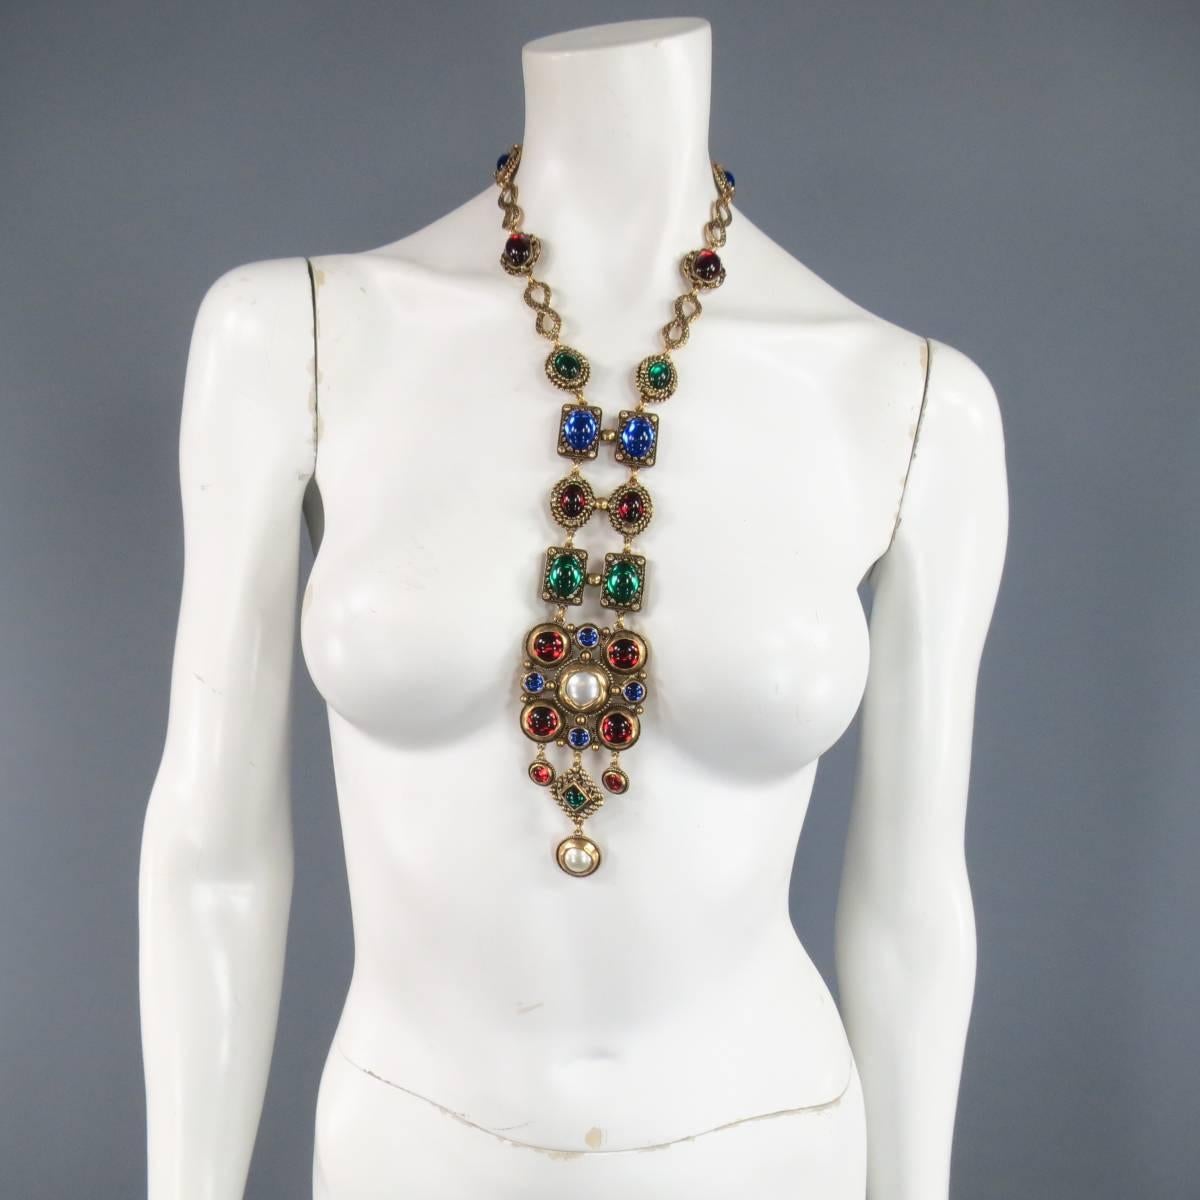 This stunning OSCAR DE LA RENTA historical European / Egyptian inspired statement necklace comes in gold tone engraved and rhinestone studded metal and features a long center piece with gorgeous ruby red, green, and blue jewels and faux pearls in a